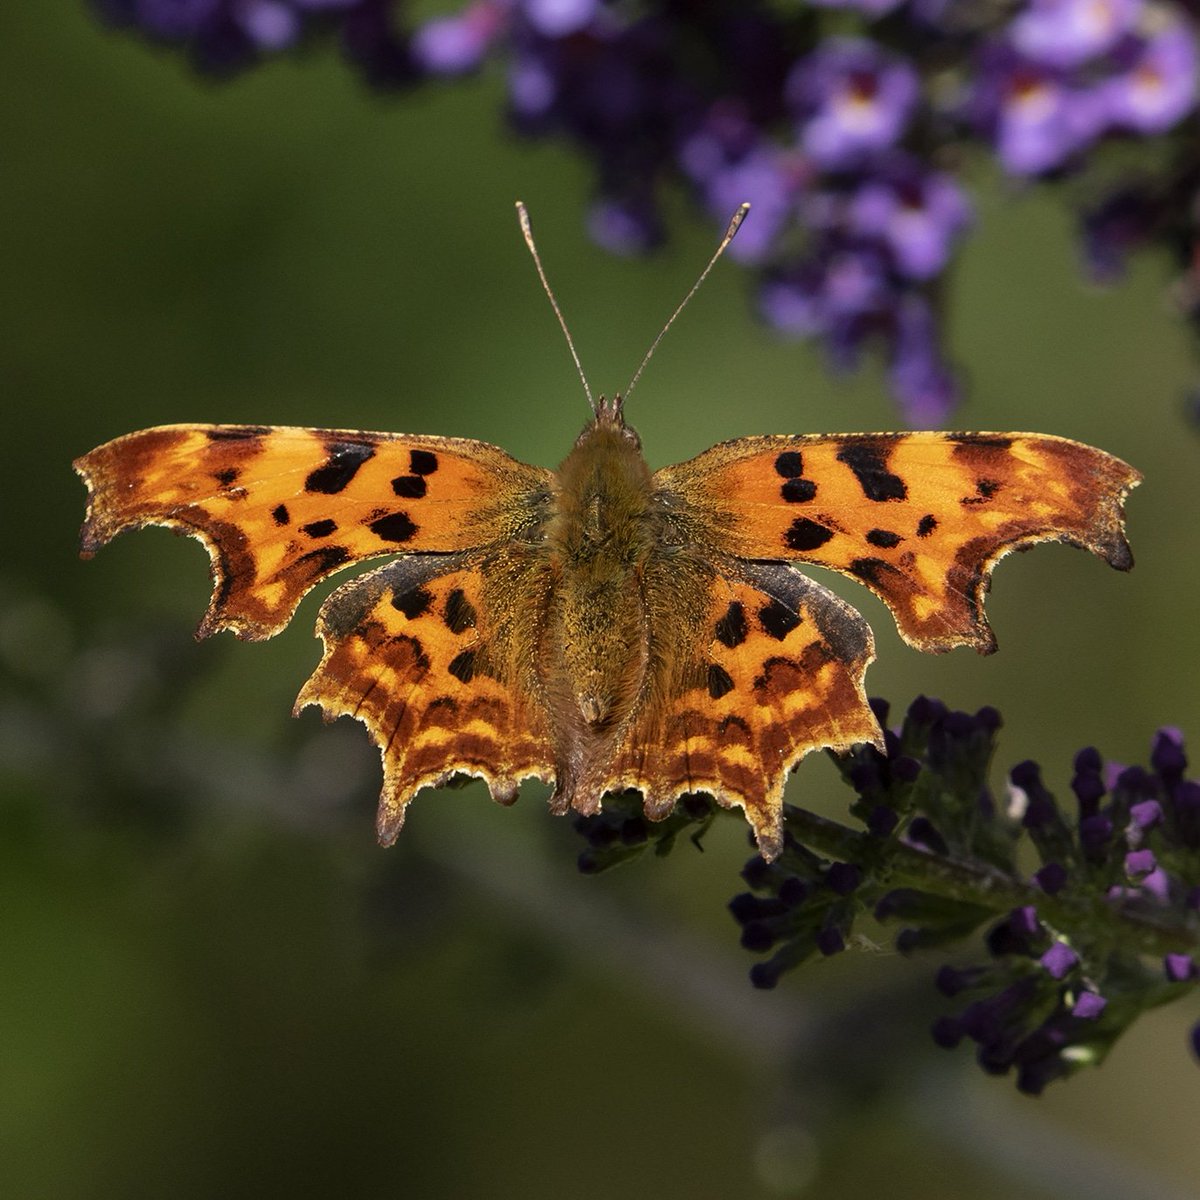 A beautiful Comma Butterfly in our garden
#naturephotography #gardenlife #rspb_love_nature #butterflies #uk_wildlife_images #insects #naturelovers #Ourworldisworthsaving #bbcspringwatch #bestnatureshots #bbcwildlife #thebritishwildlife #BBCWildlifePOTD